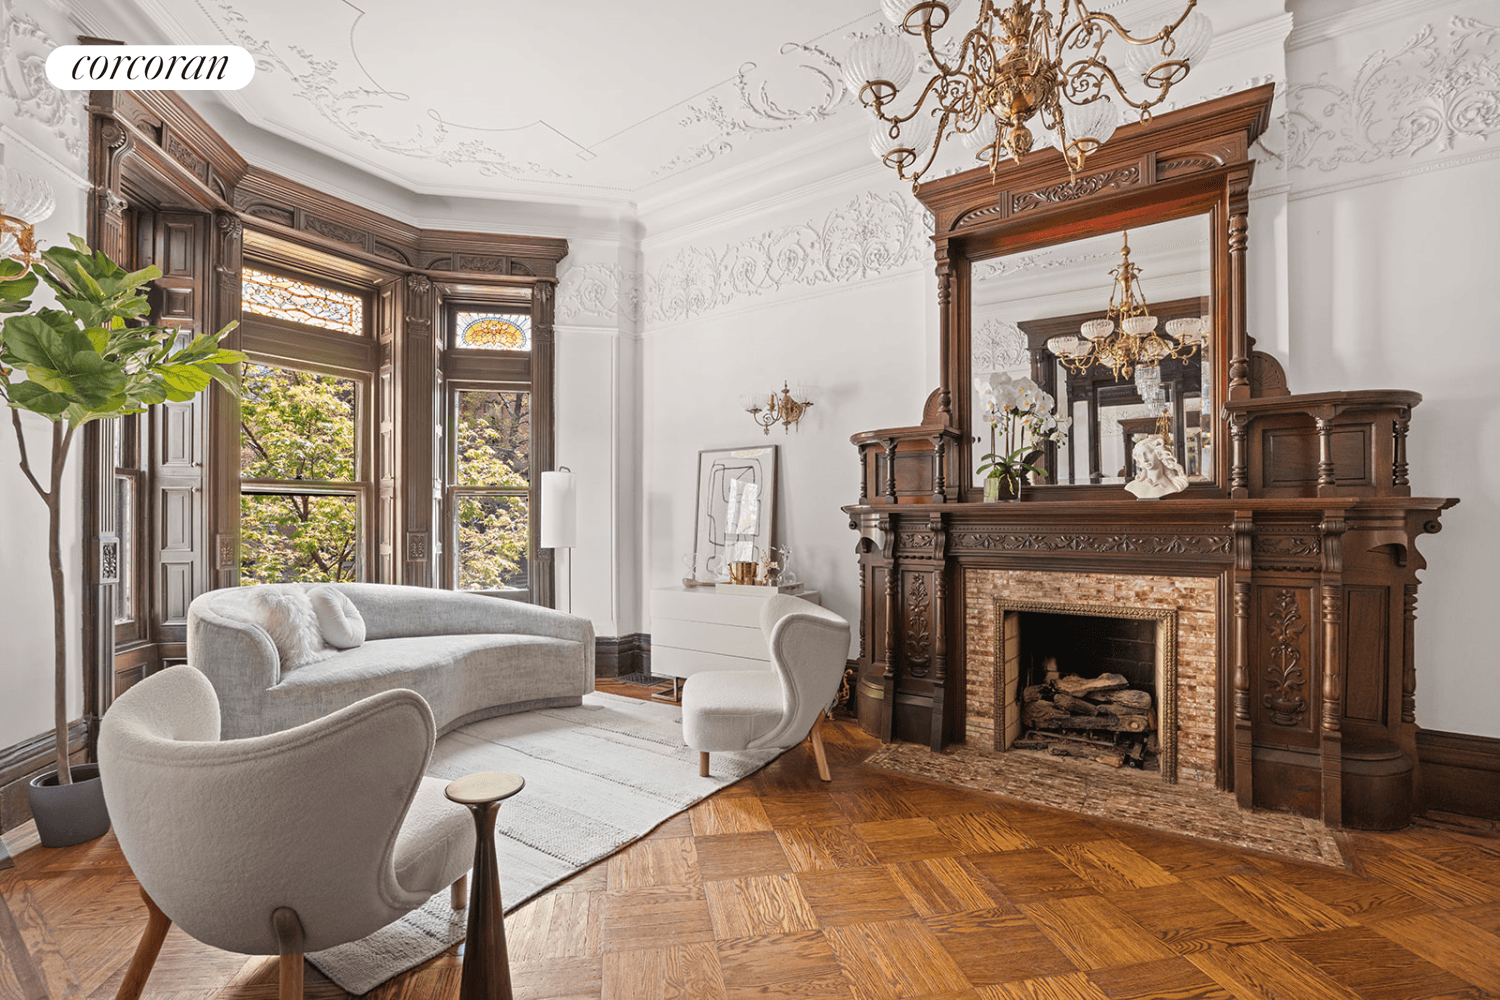 Relish the historic elegance of this finely restored turn of the century townhouse in prime Park Slope brimming with charm and original details.